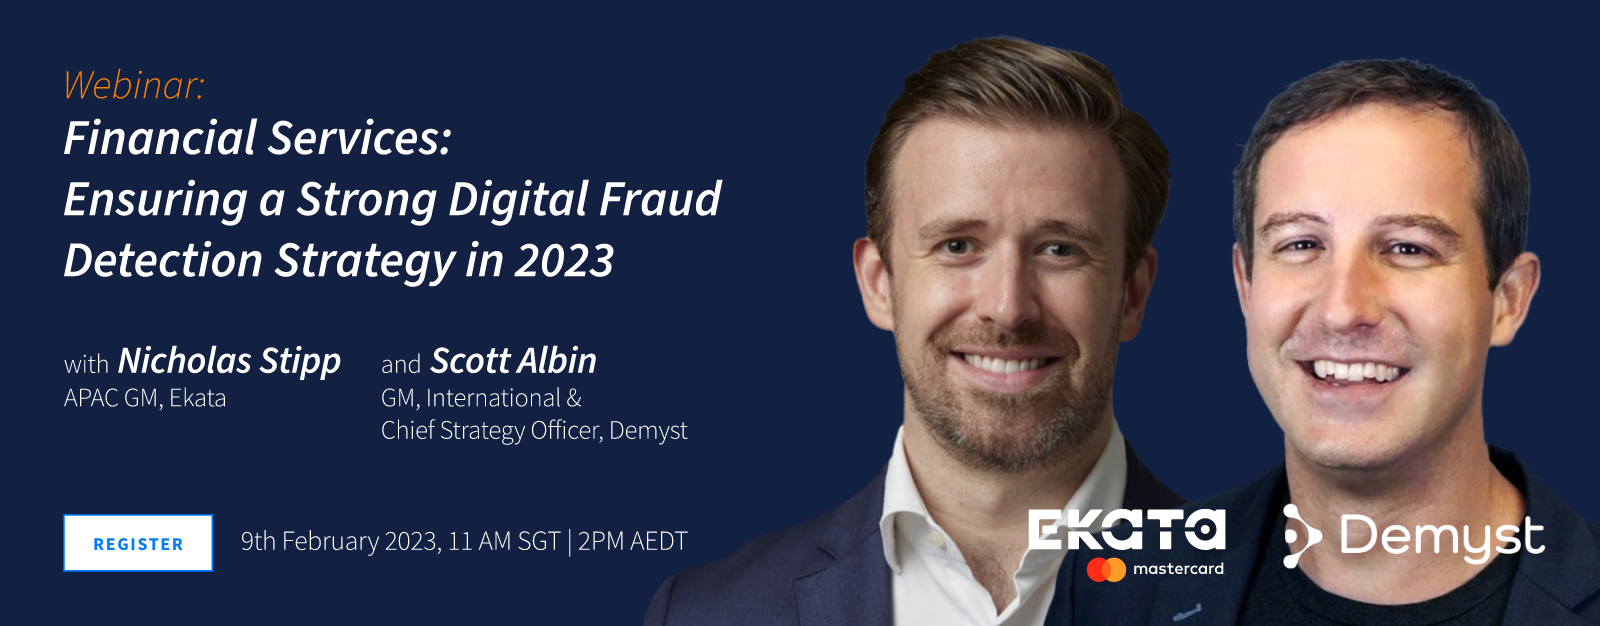 Financial Services Ensuring a Strong Digital Fraud Detection Strategy in 2023